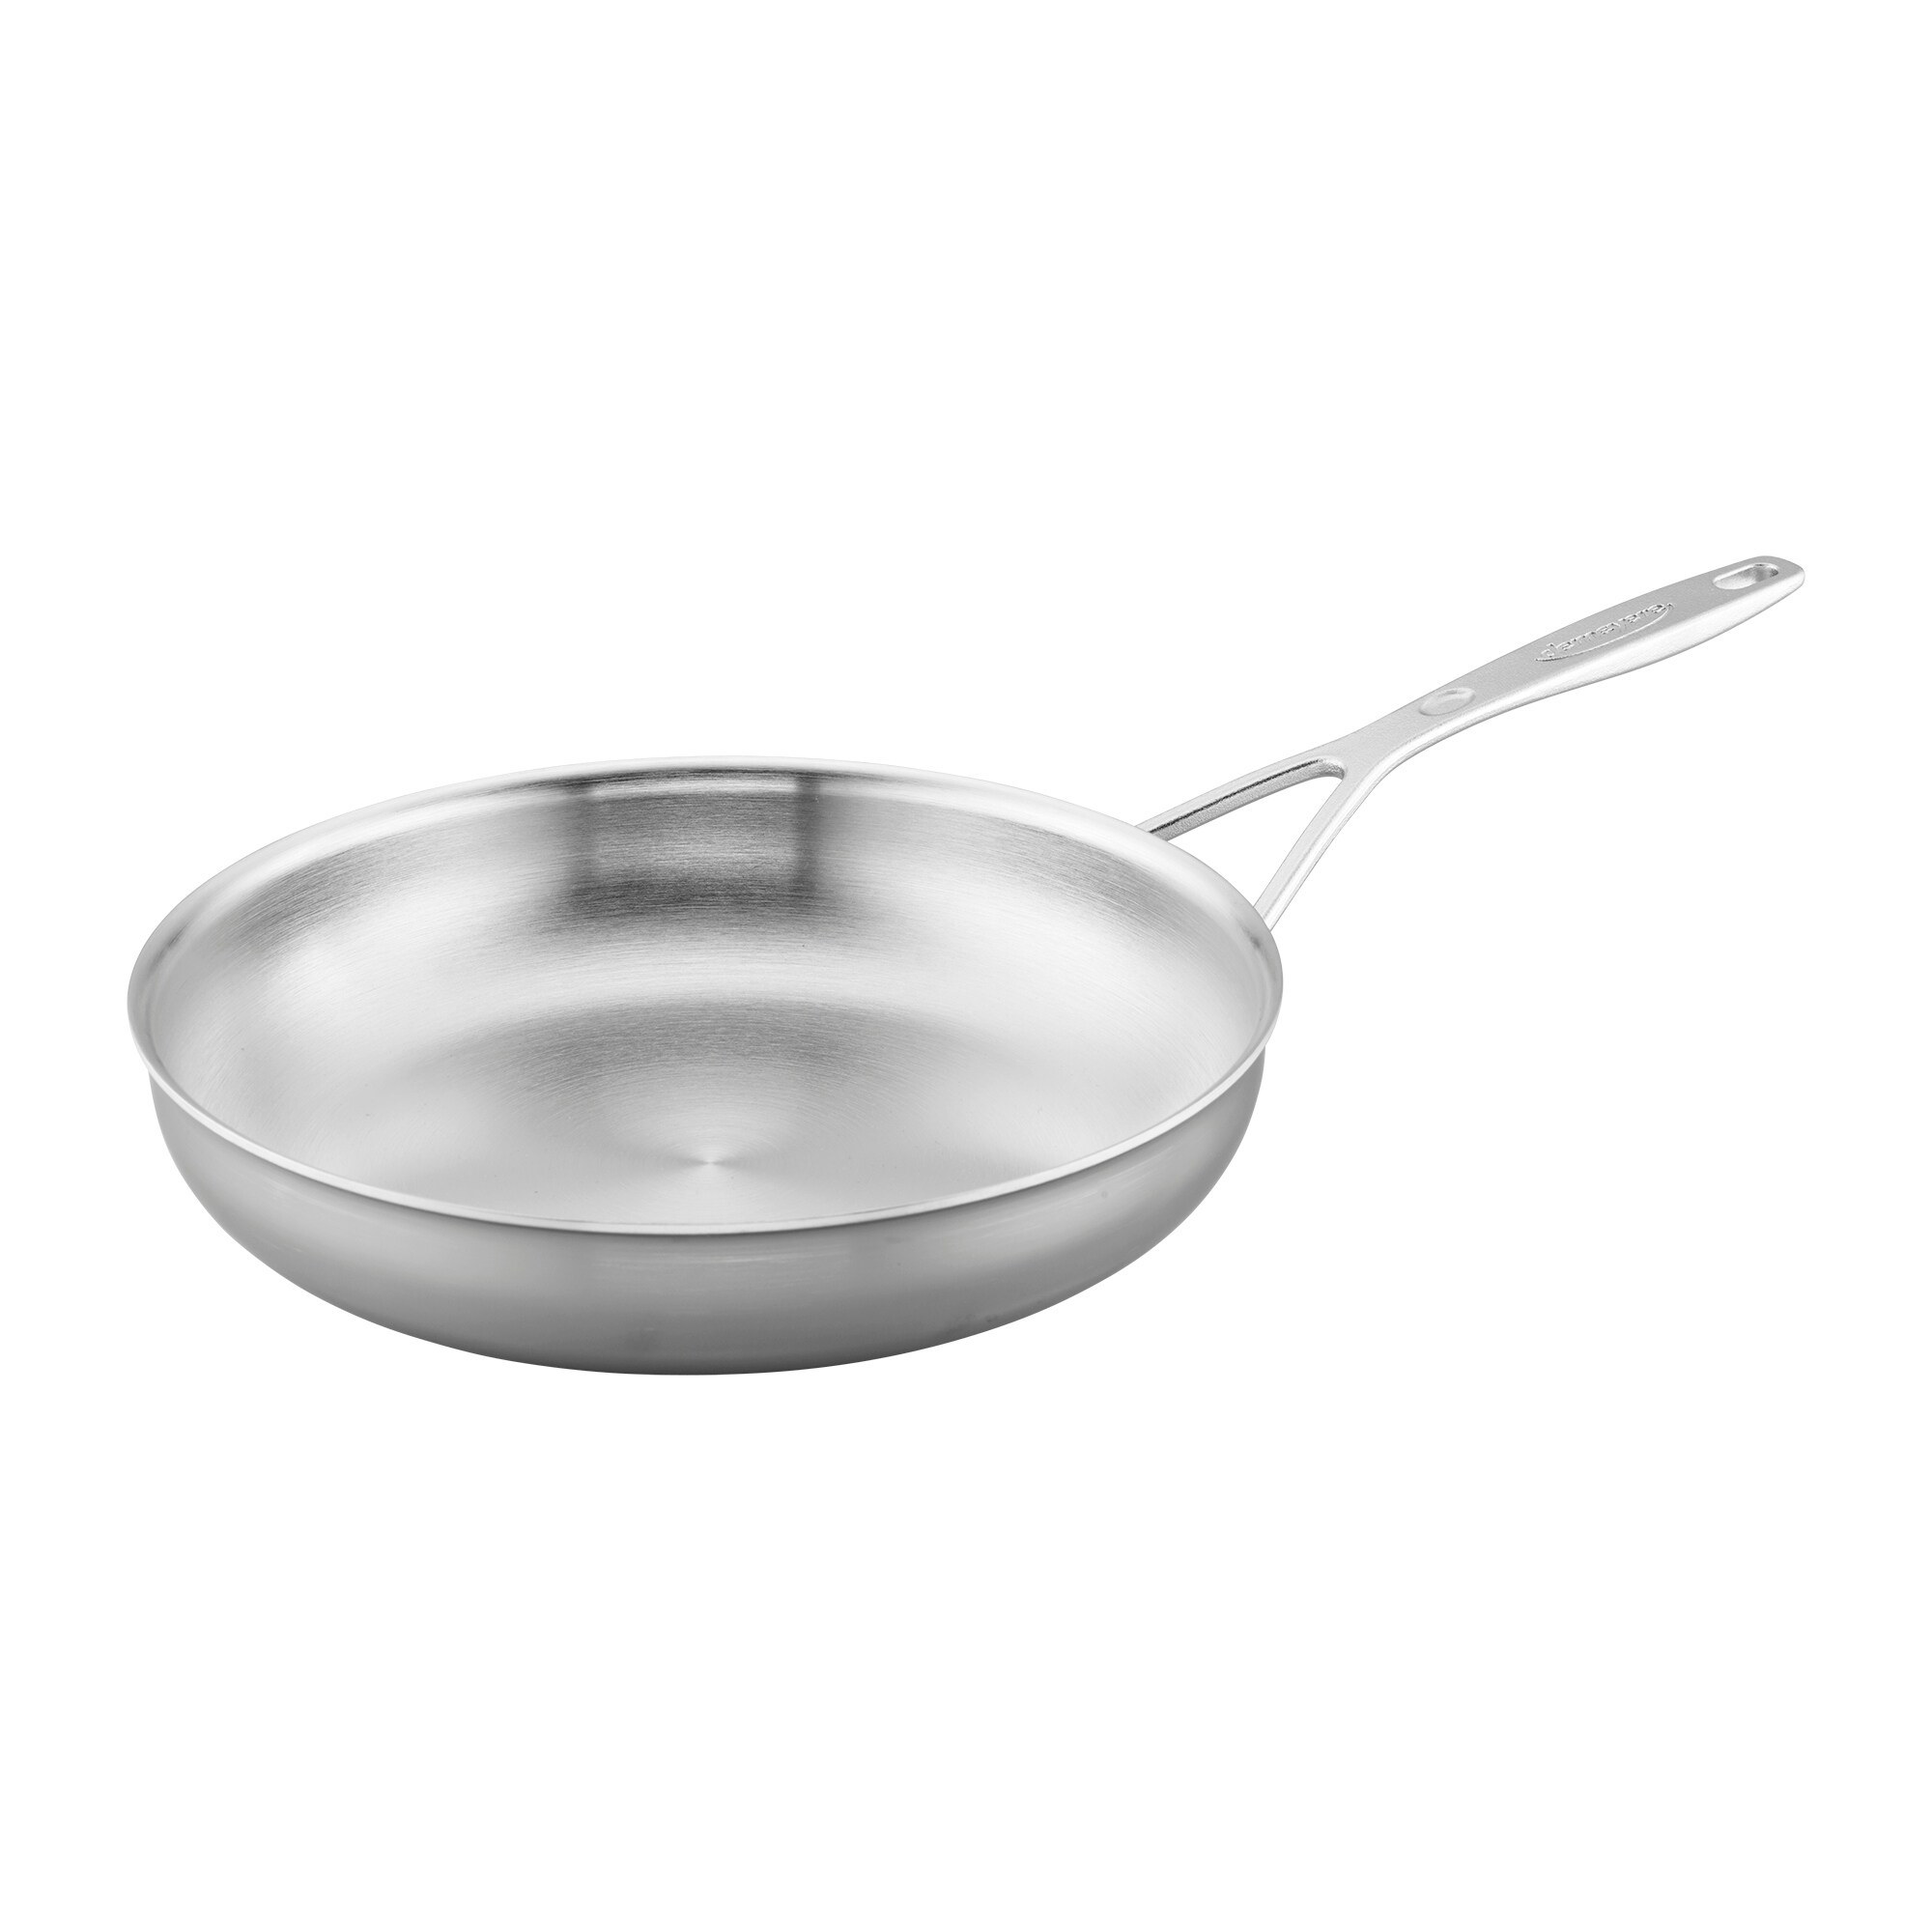 Viking Professional 5-Ply Stainless Steel Fry Pan - 8 in.